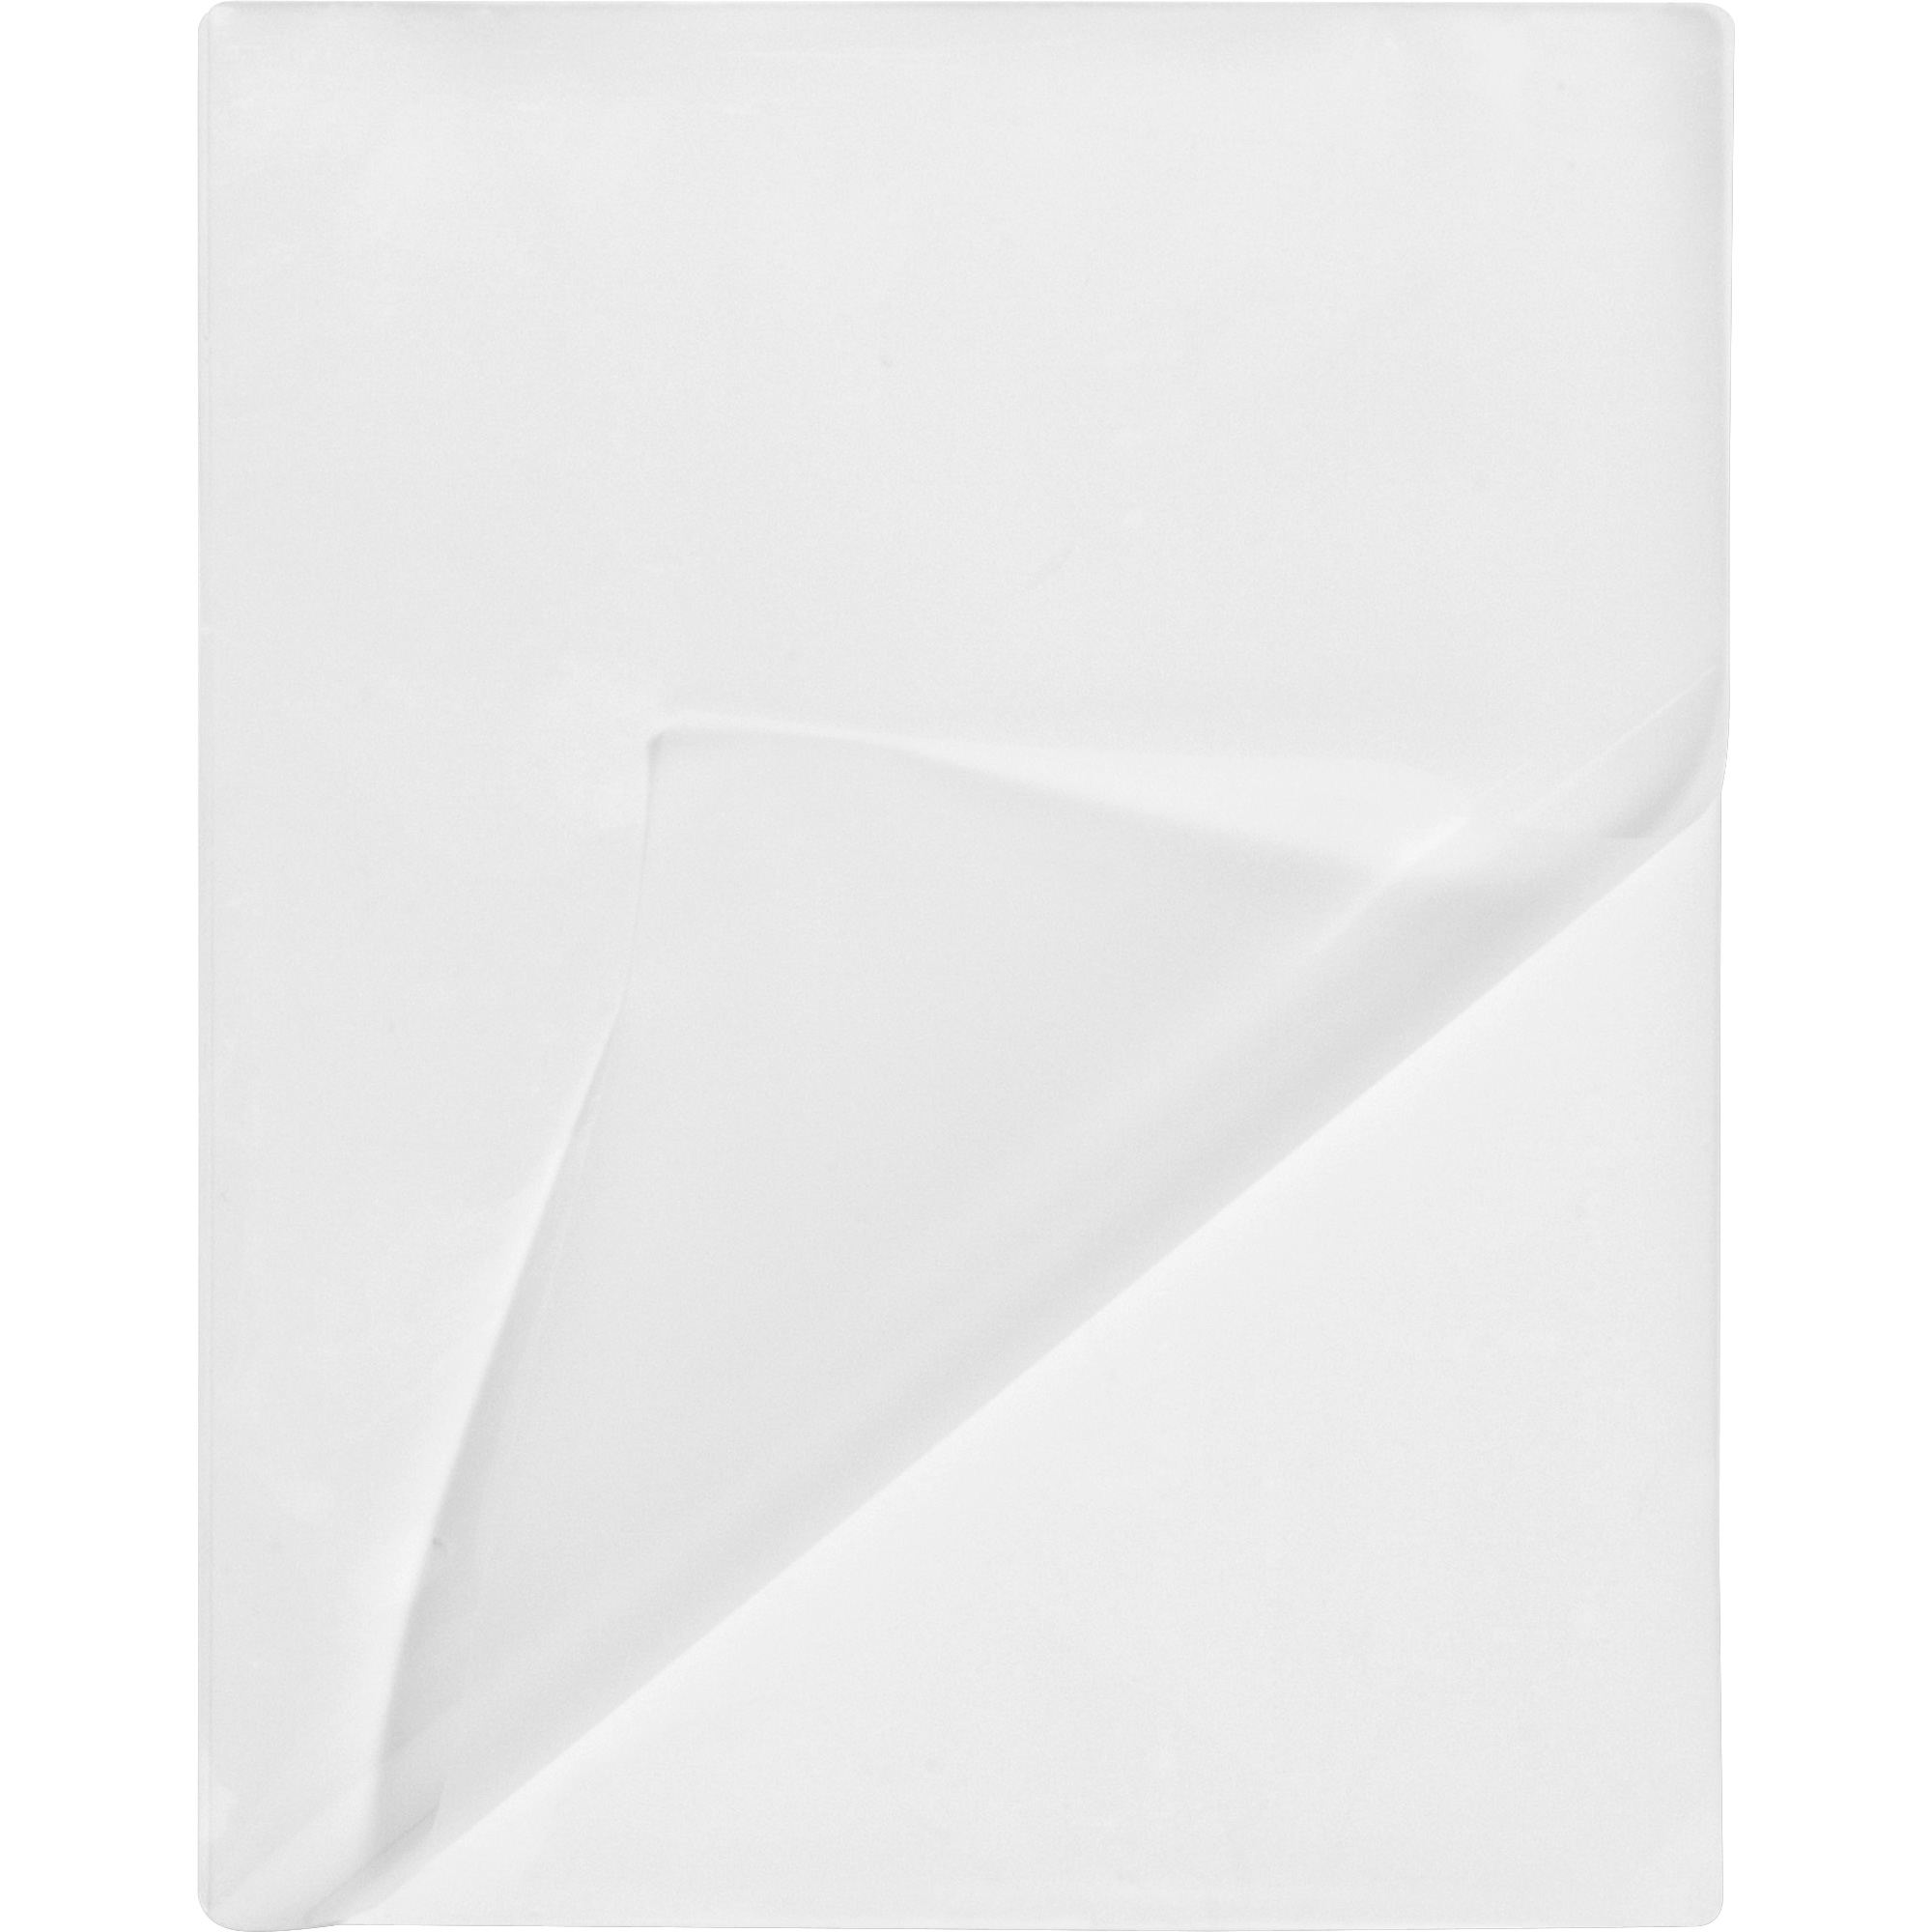 Business Source 5 ml Letter-size Laminating Pouches - 100 Sheets